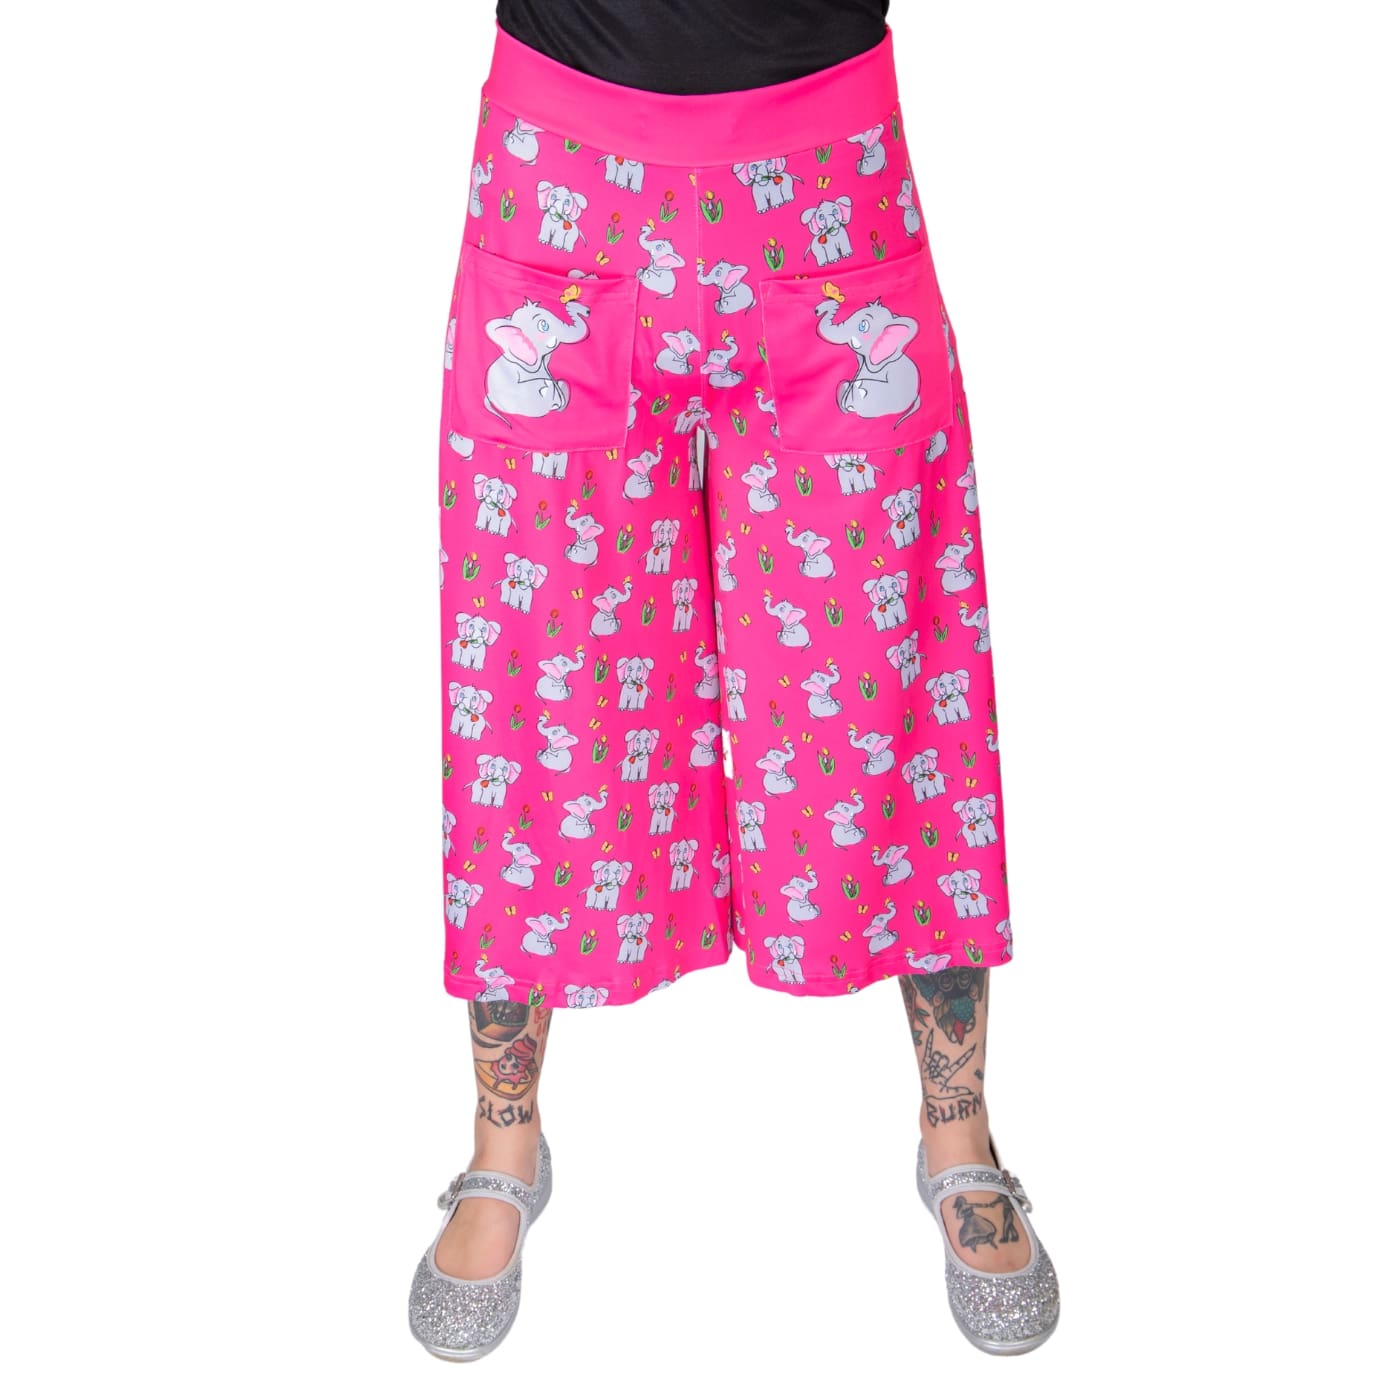 Parade Culottes by RainbowsAndFairies.com.au (Elephant - Tulips - 34 Pants - Kitsch - Vintage Inspired - Animal Print - Cute - Hot Pink - Wide Leg Pants) - SKU: CL_CULTS_PARAD_ORG - Pic-05